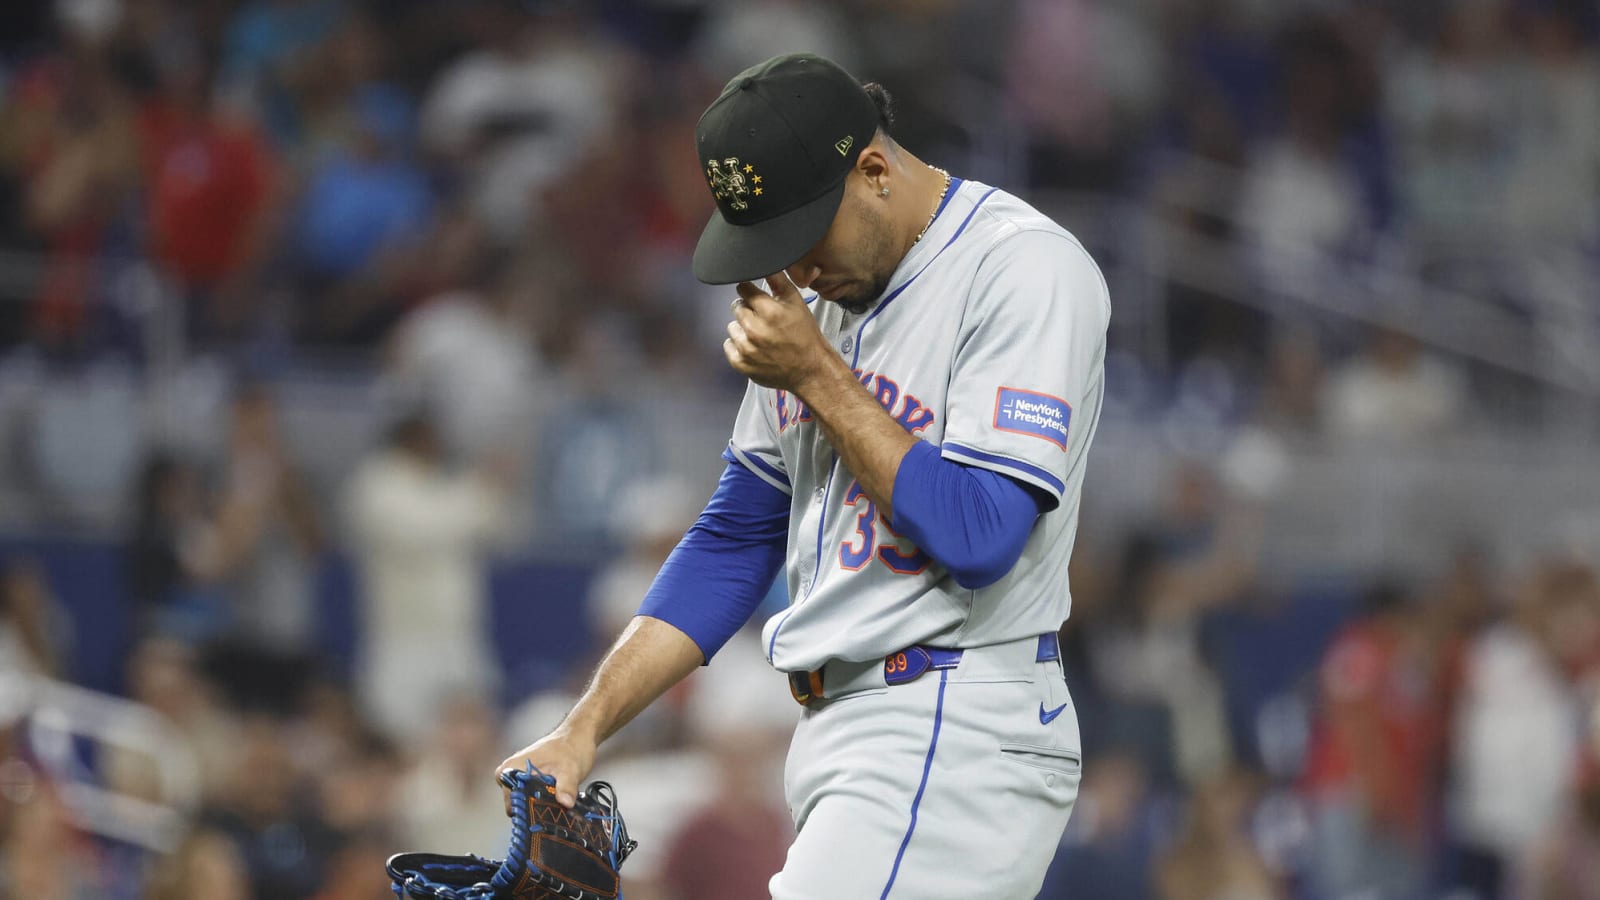 A Look At Edwin Diaz’s Struggles, And Why It’s Concerning